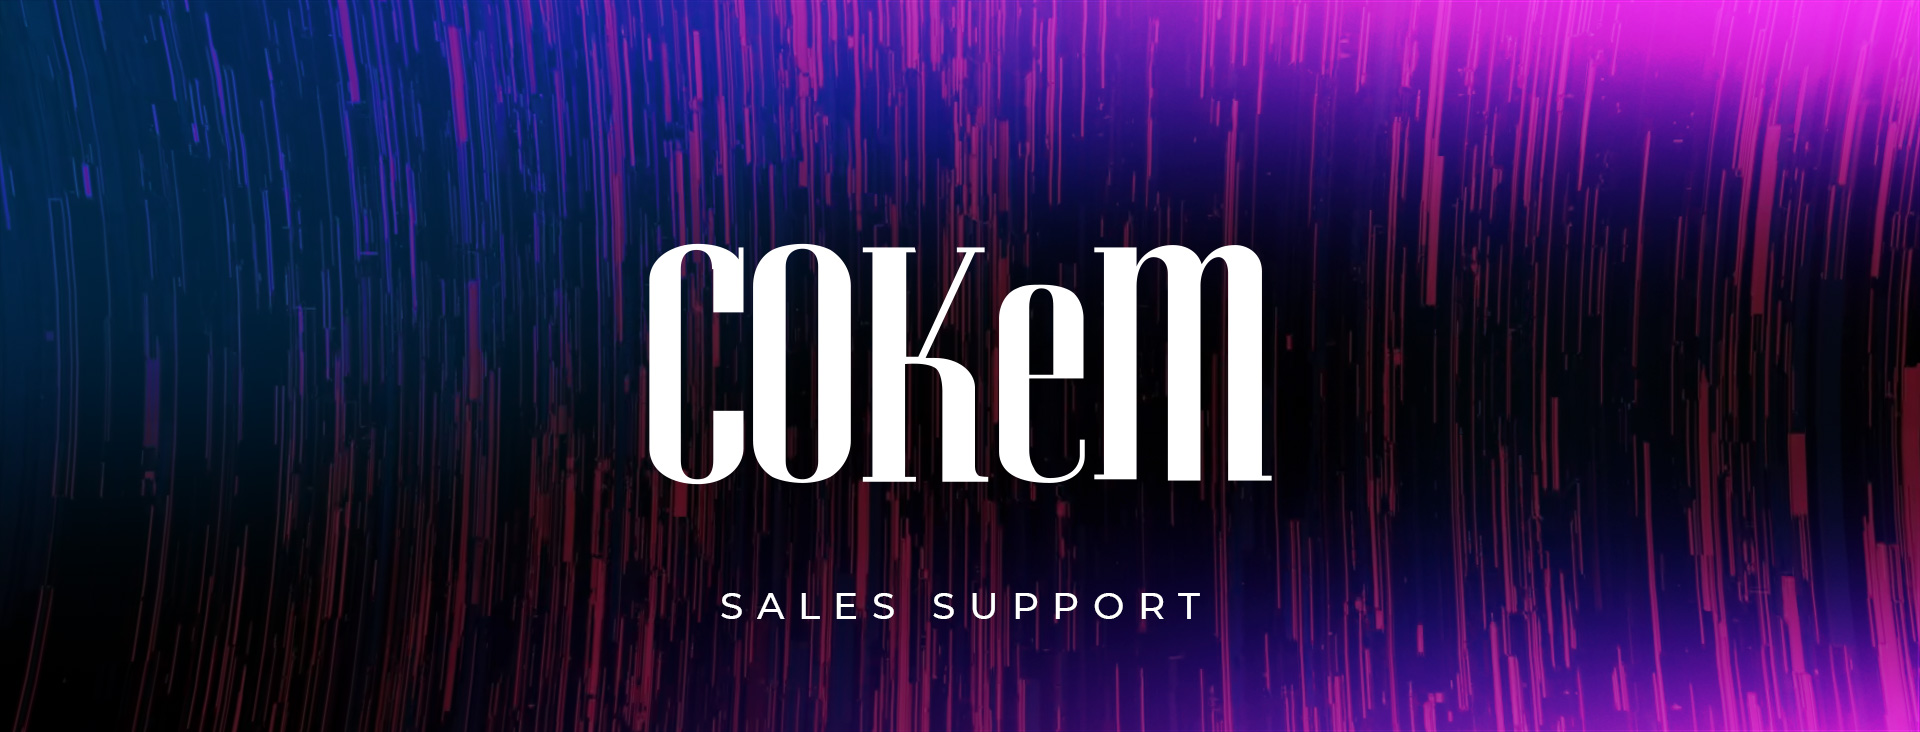 Sales Support Banner